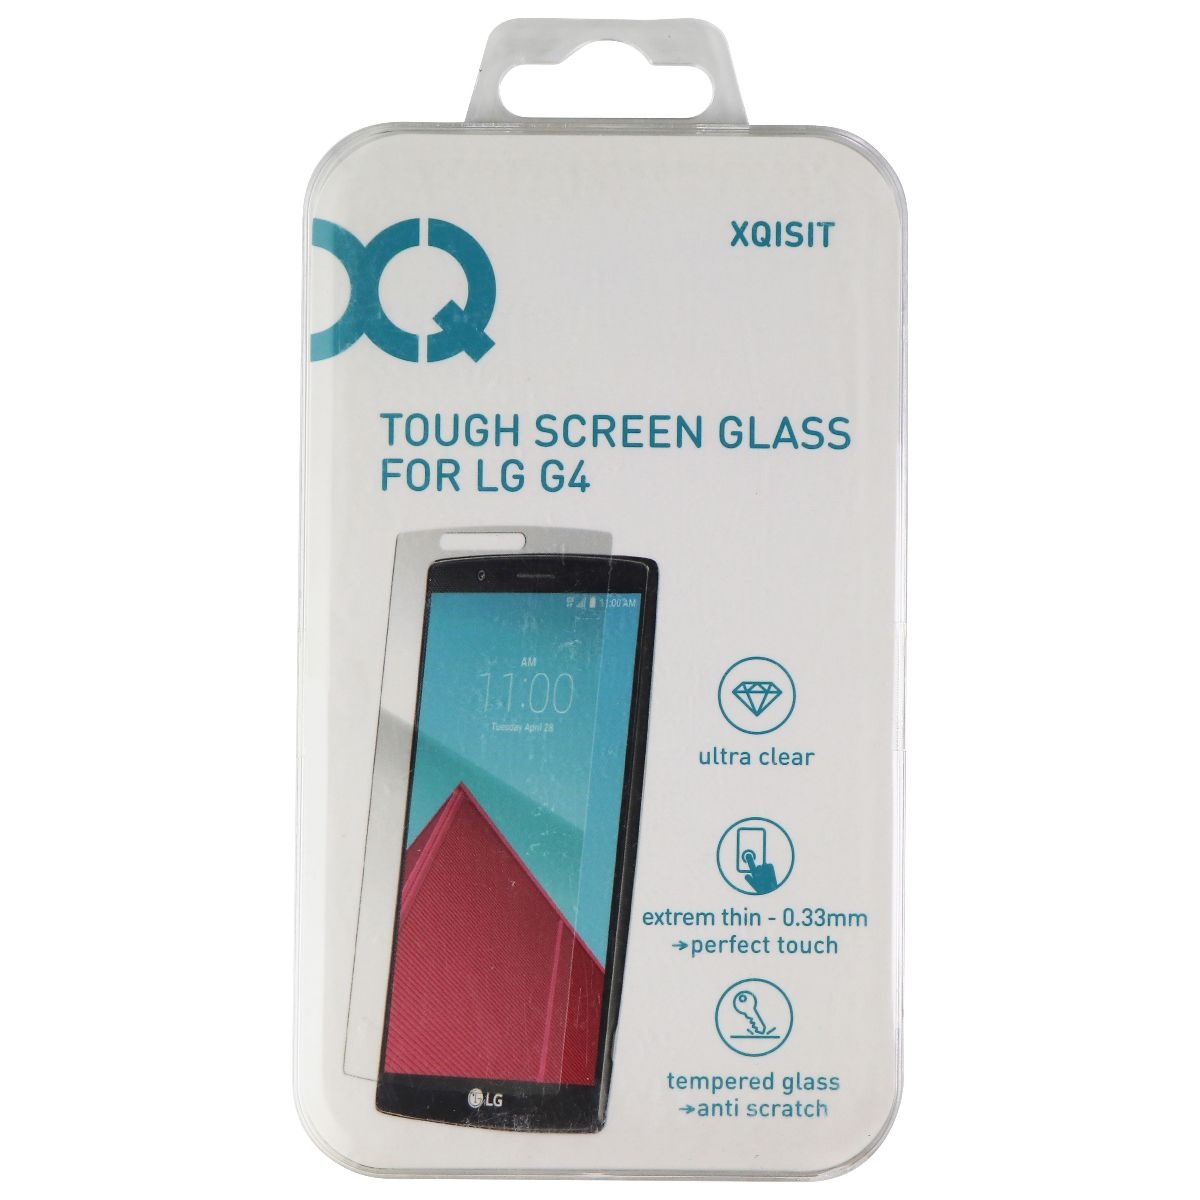 Xqisit Tough Screen Glass for LG G4 Smartphones - Clear